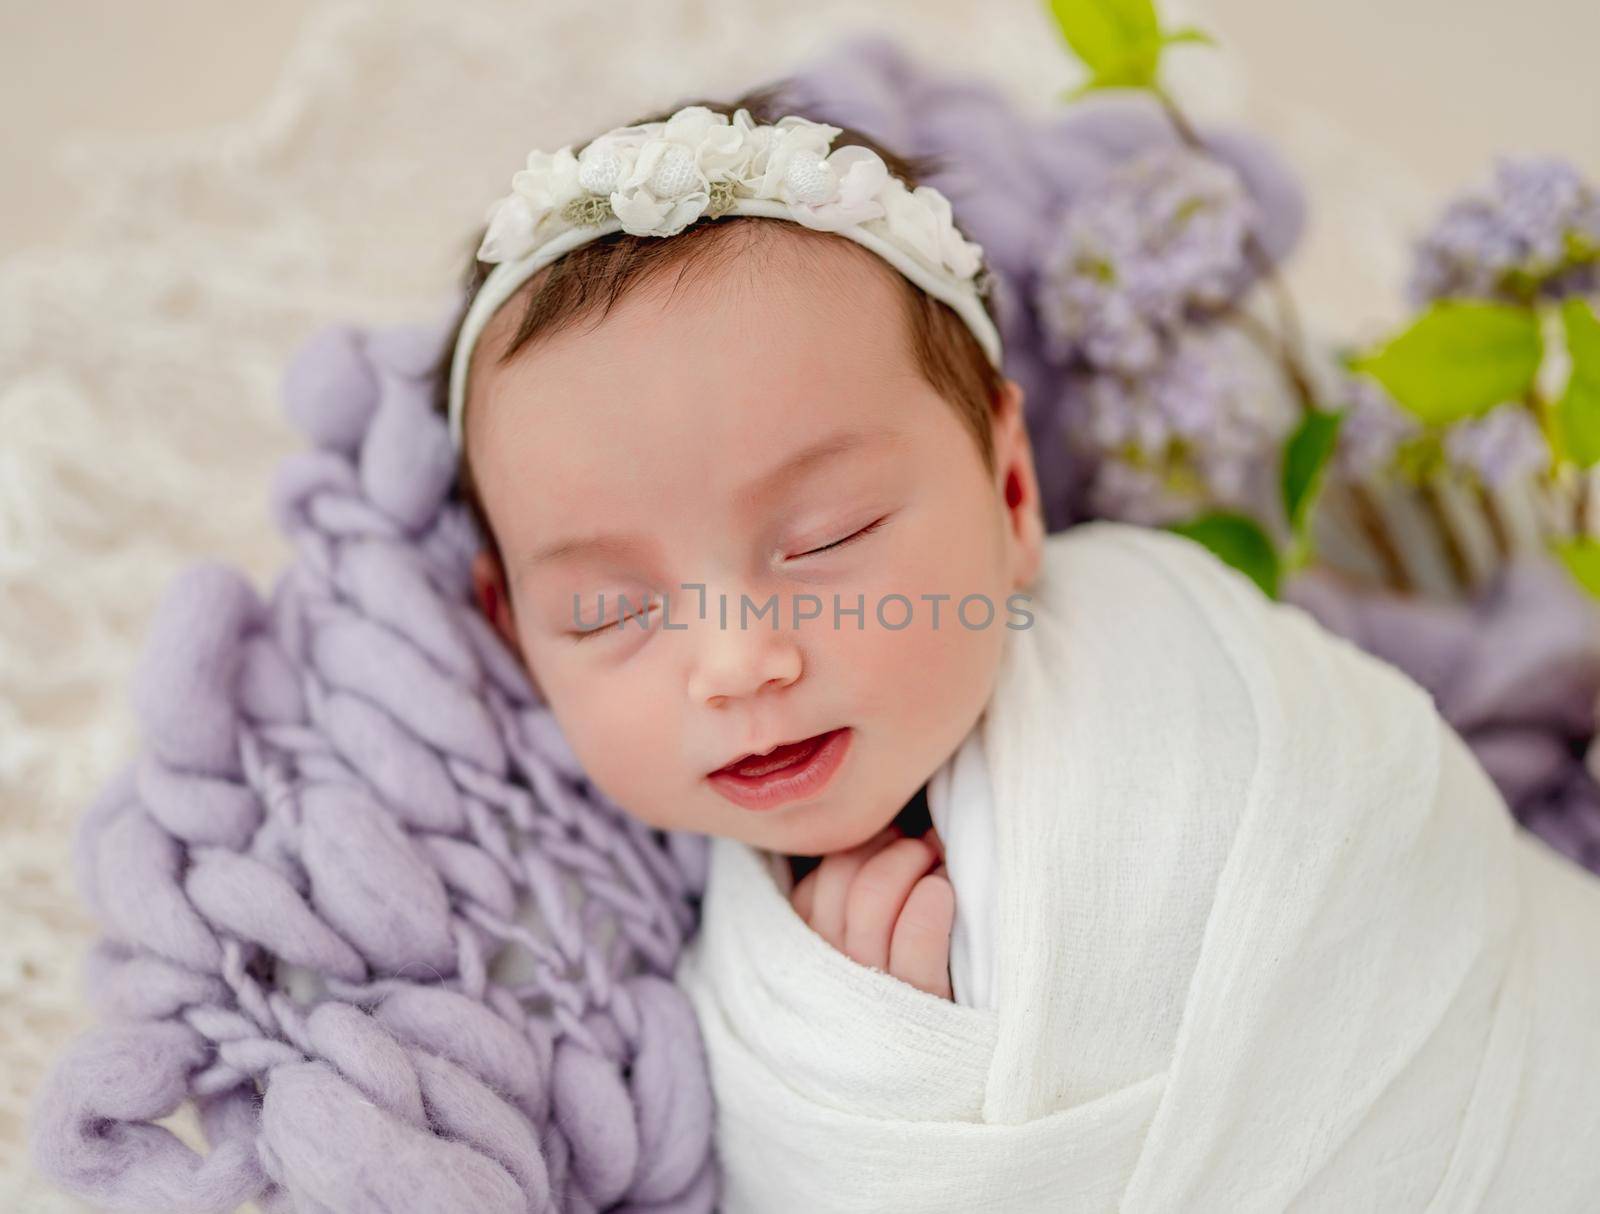 Portrait of little beautiful newborn baby girl swaadled in fabric and wearing wreath with flowers sleeping and smiling during studio photoshoot. Cute infant child kid napping on knitted blanket